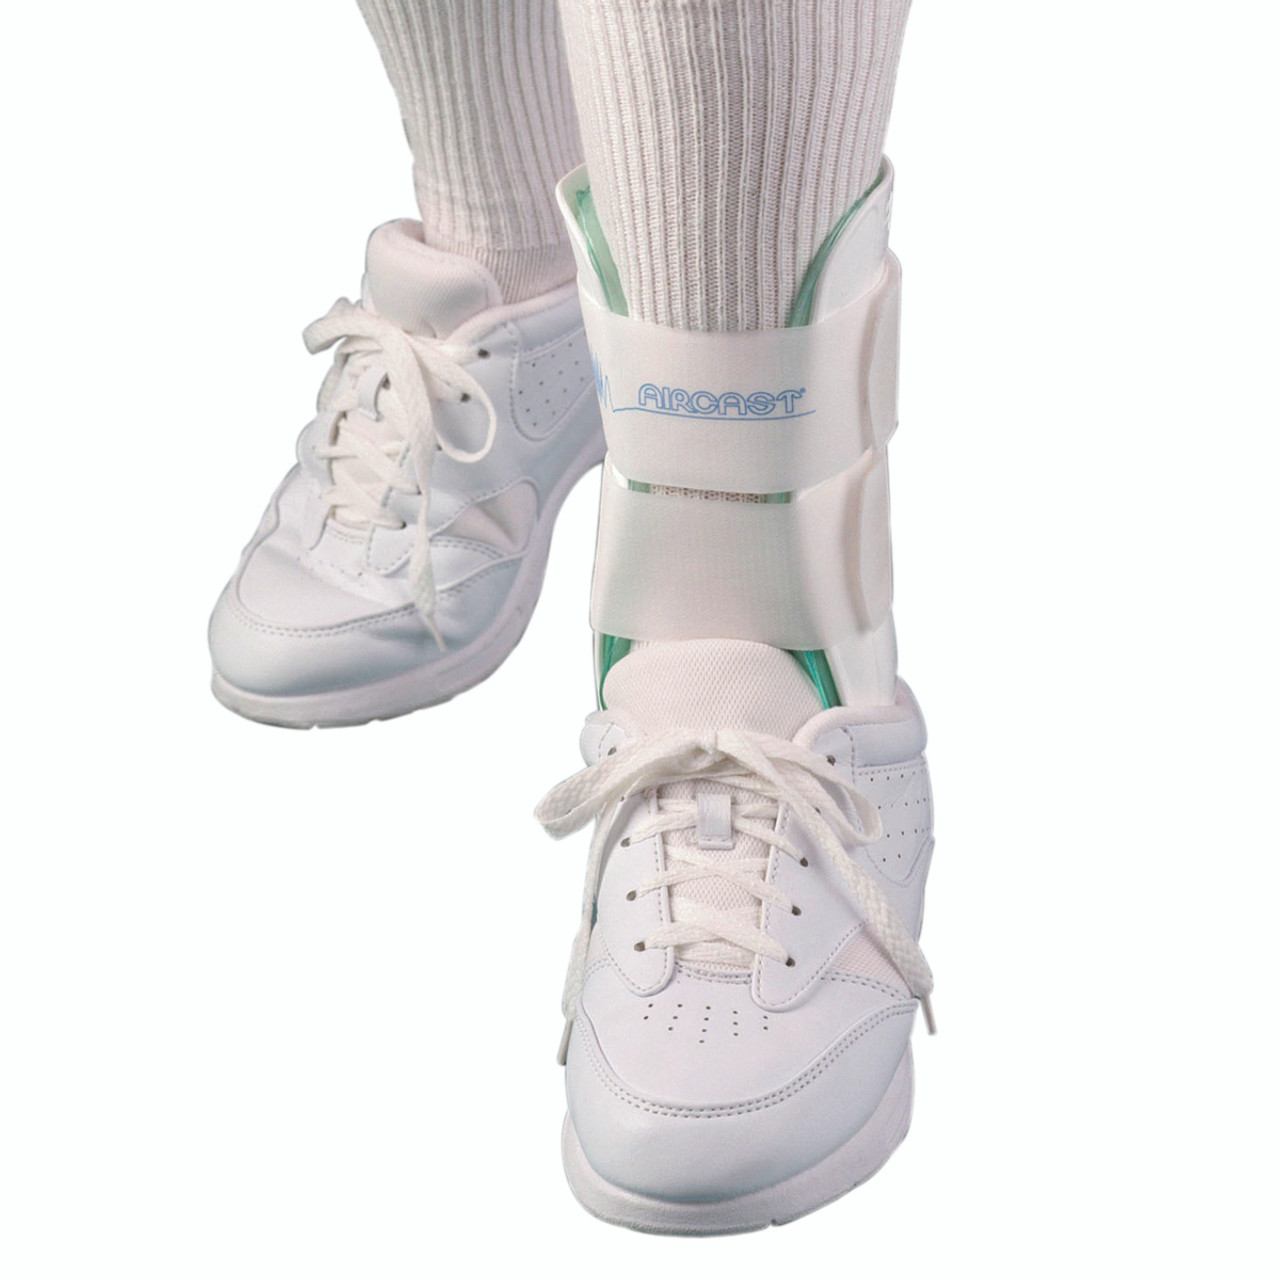 Air Stirrup¨ Ankle Brace 02C small ankle, left